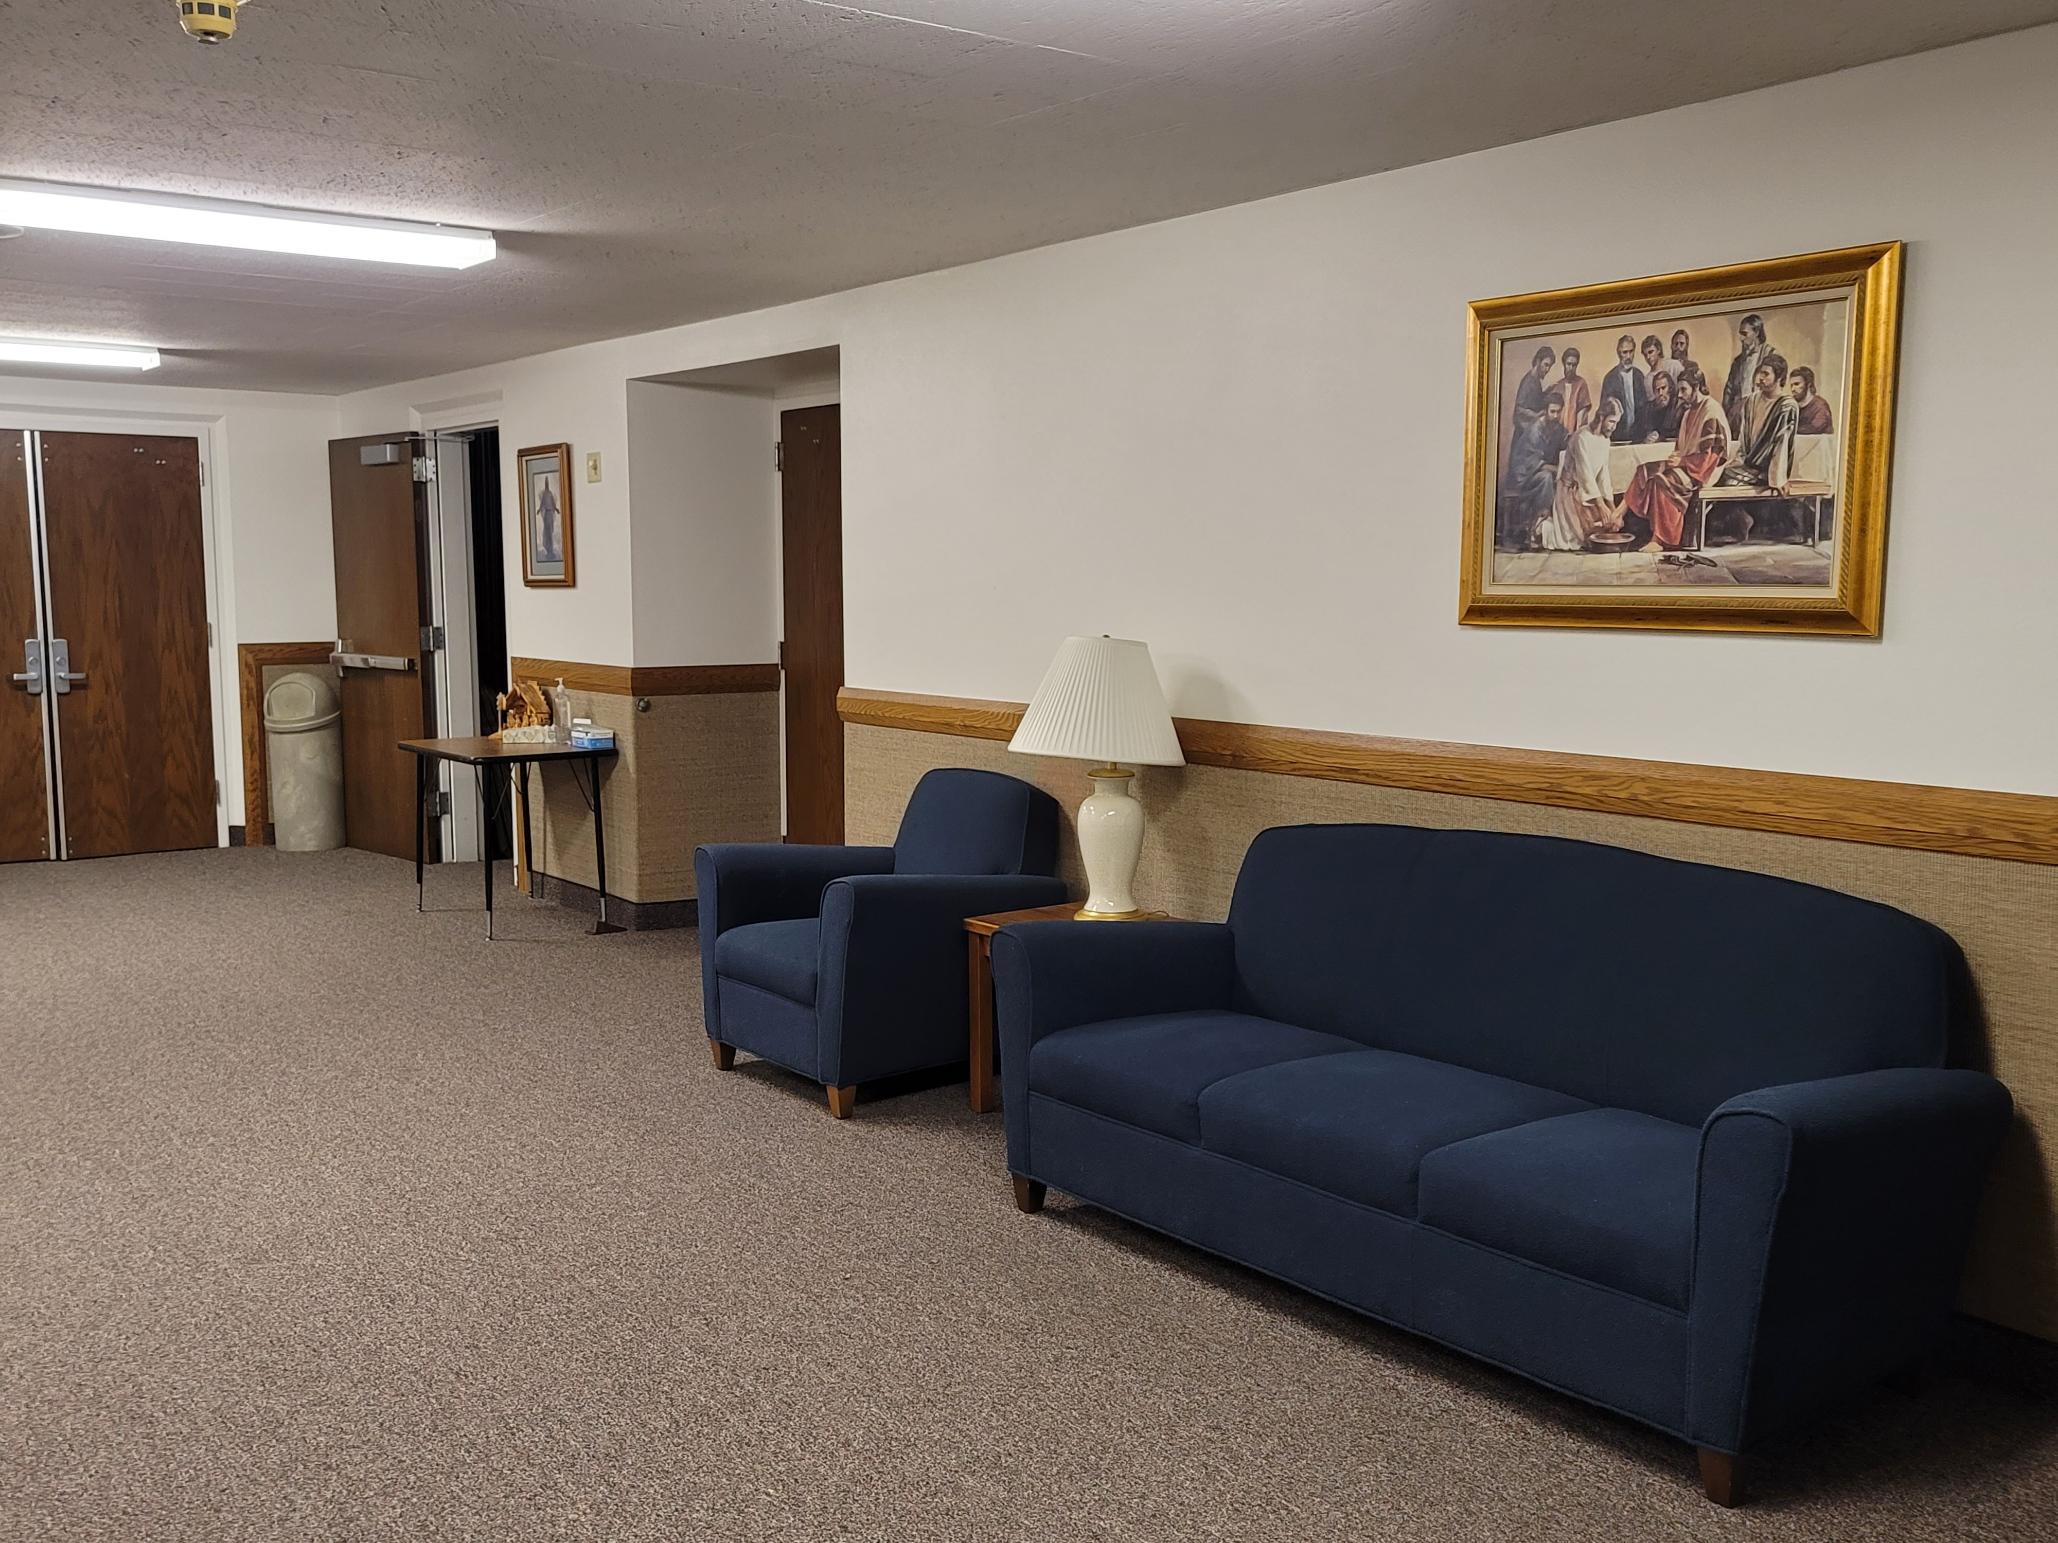 Front lobby photo of the chapel of The Church of Jesus Christ of Latter-day Saints